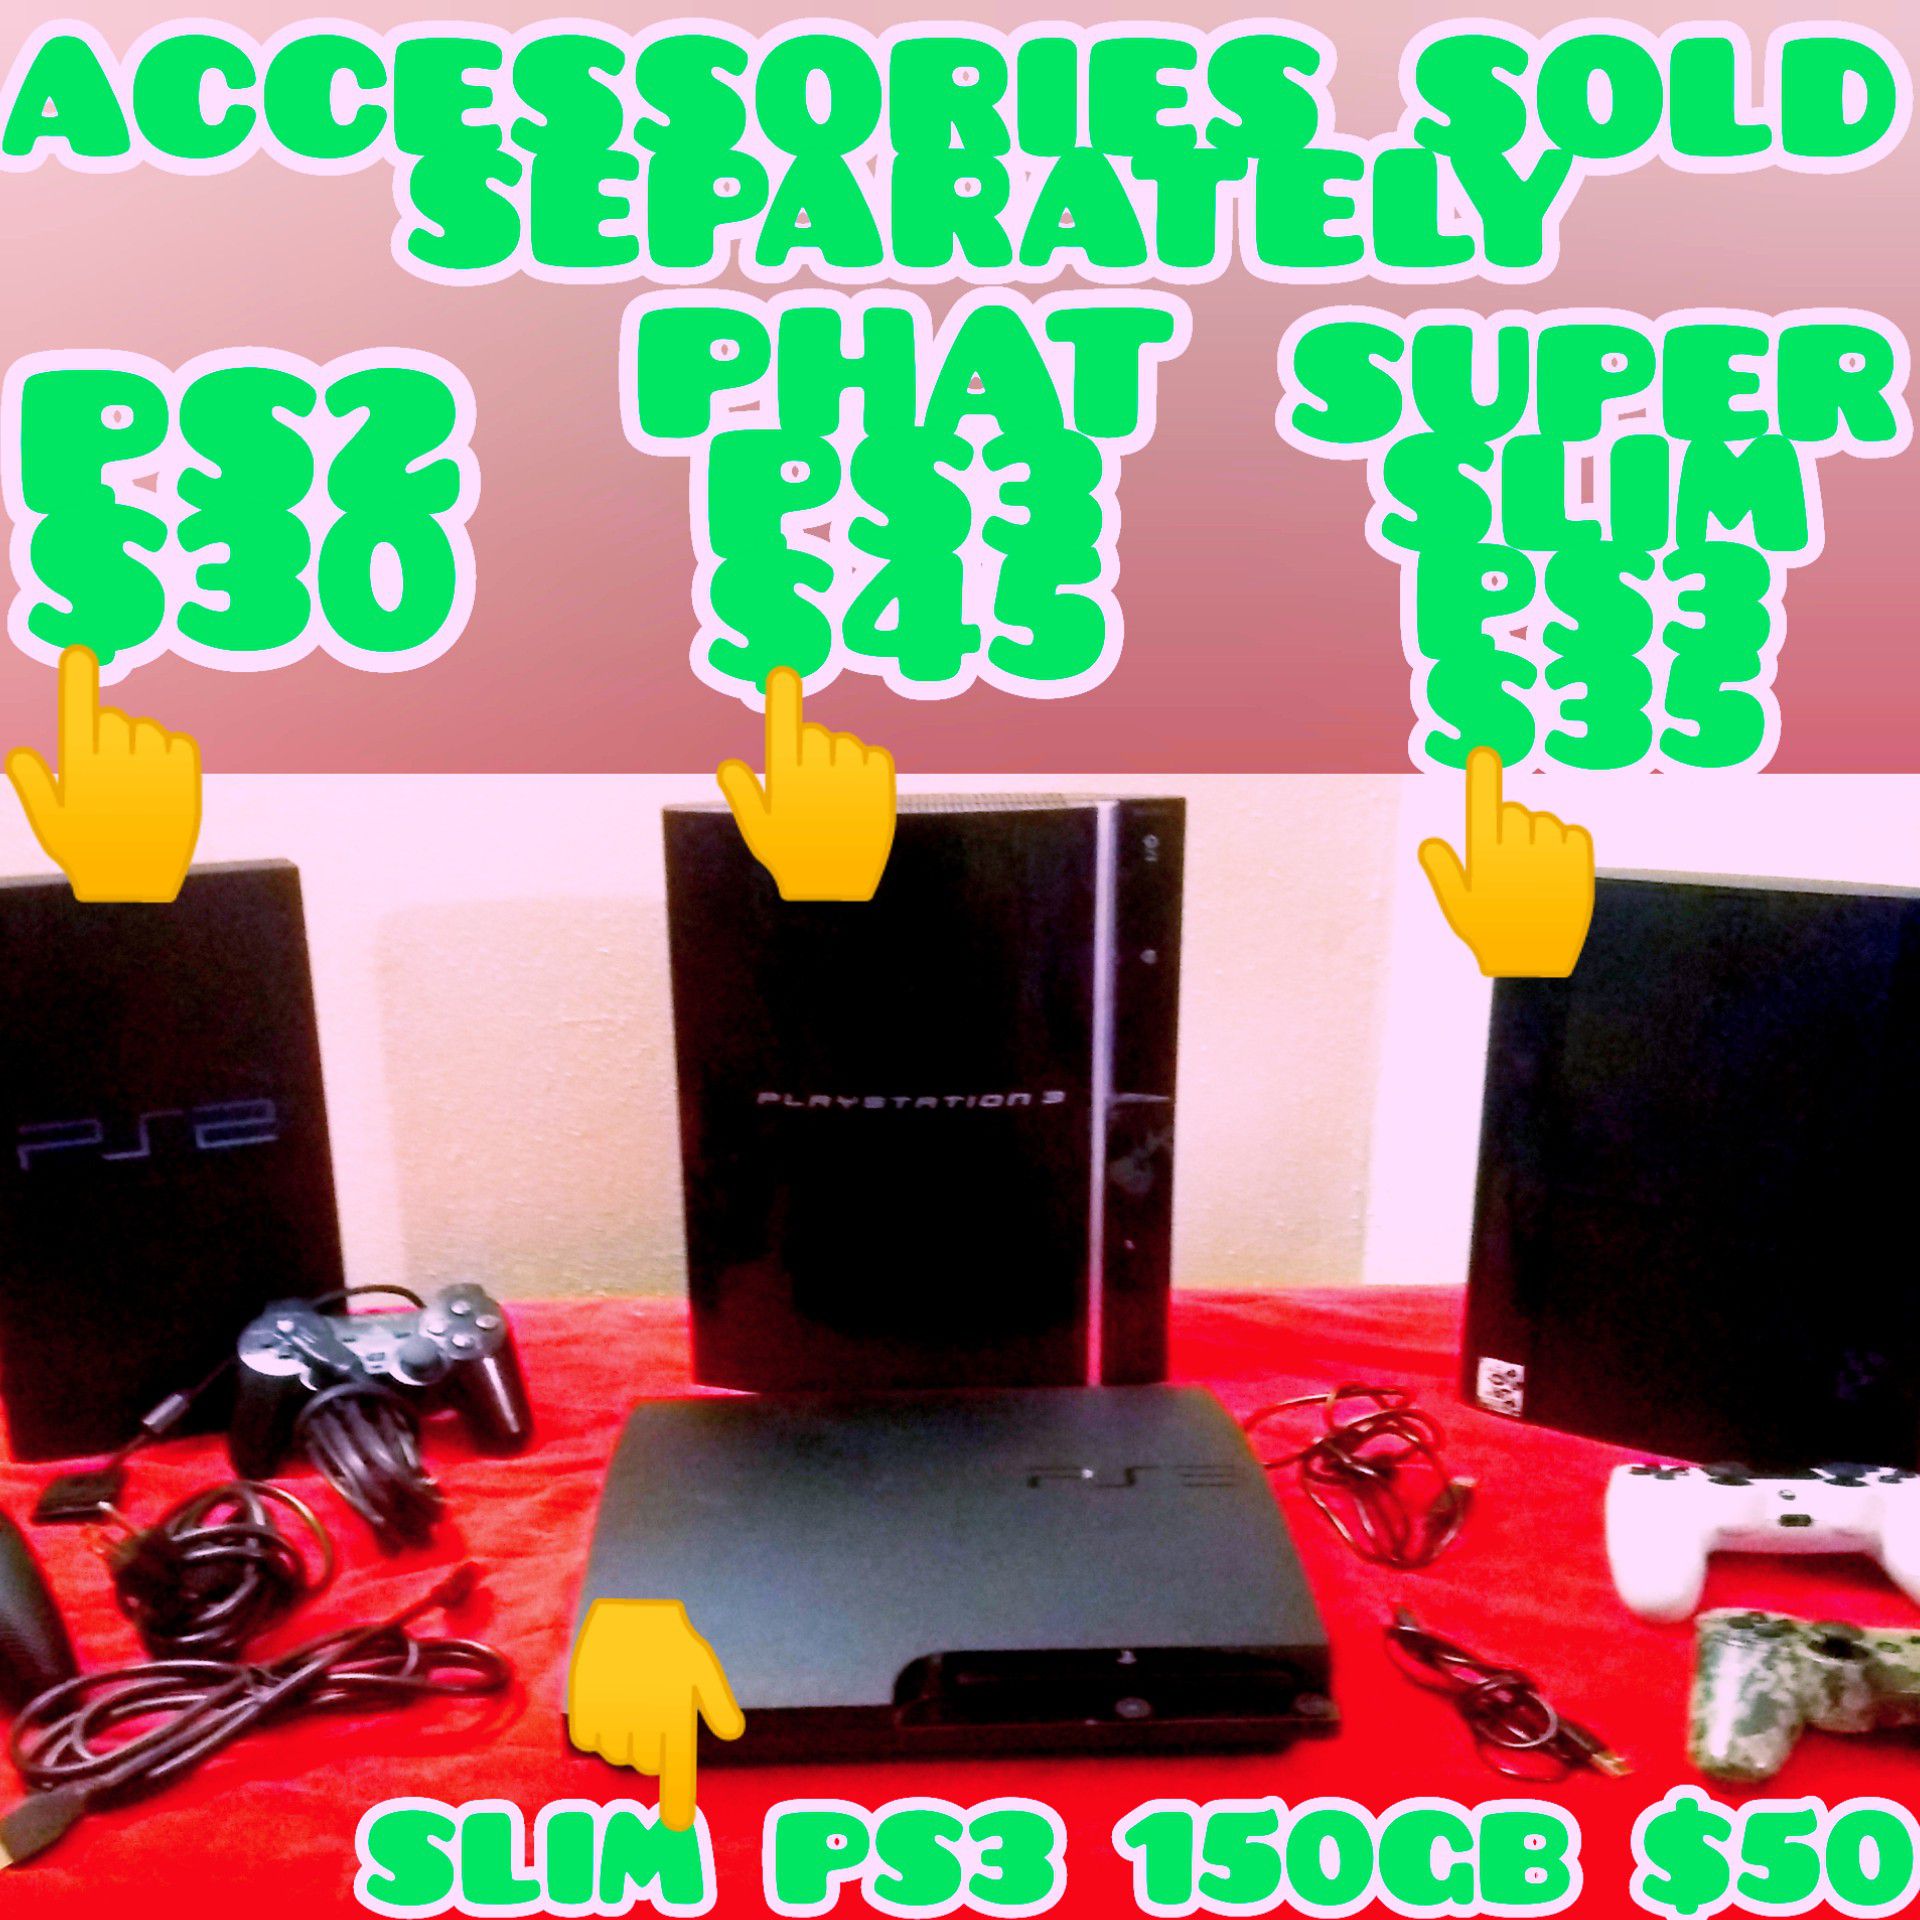 PS2, PS3, PHAT, SLIM, AND SUPER SLIM (ACCESSORIES SOLD SEPARATELY)